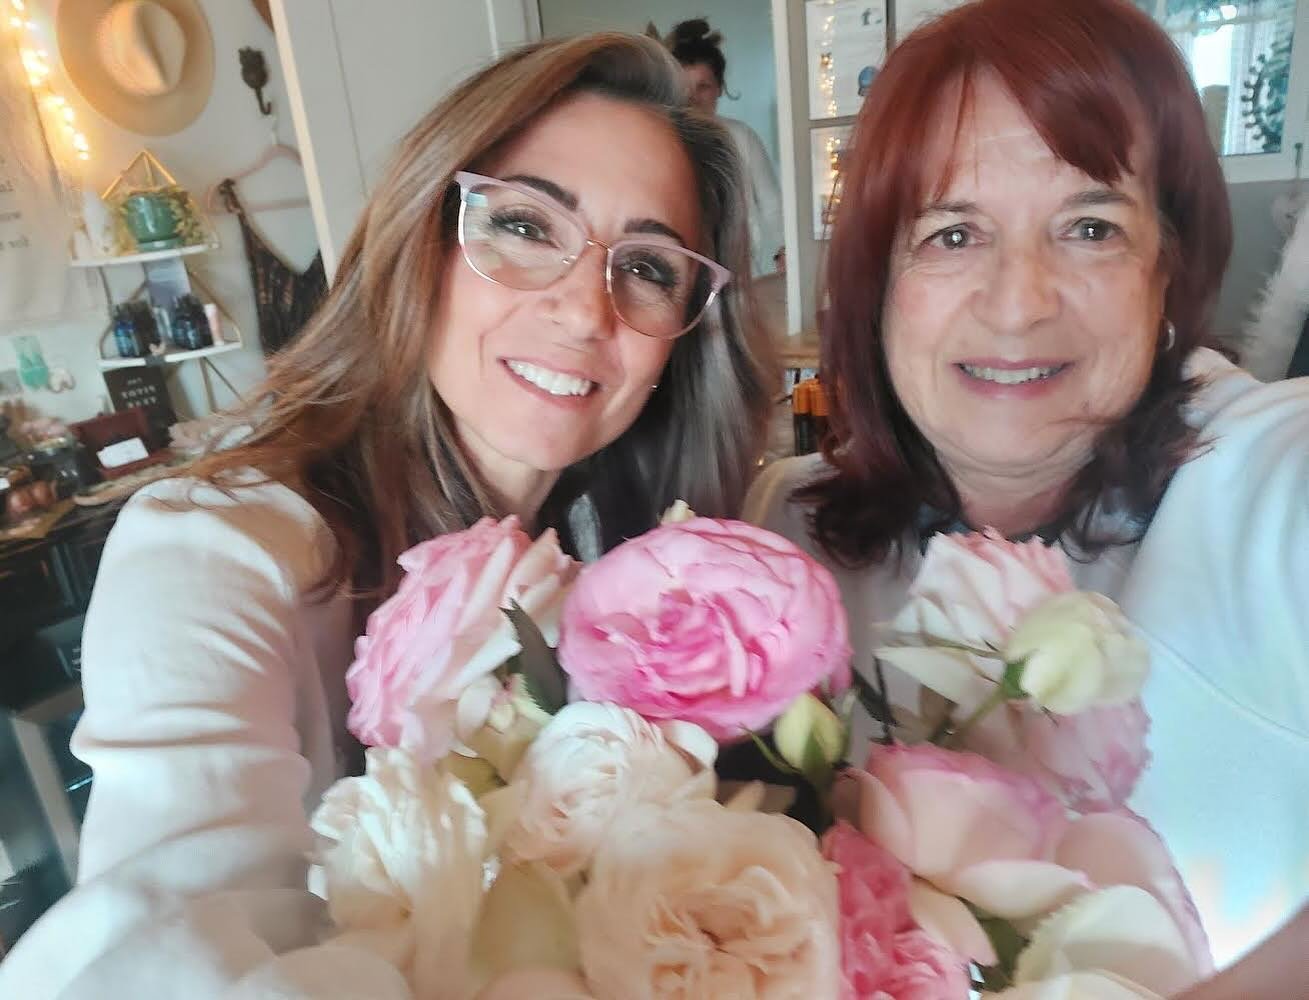 I am surrounded by the most incredible people 🌸Francine came in with this gorgeous bouquet of roses from her garden. Thank you sweetie they look so beautiful in the shala💕

#ilovemycommunity #yogayogascv #pinkroses #yogainspiration #kindness #grate